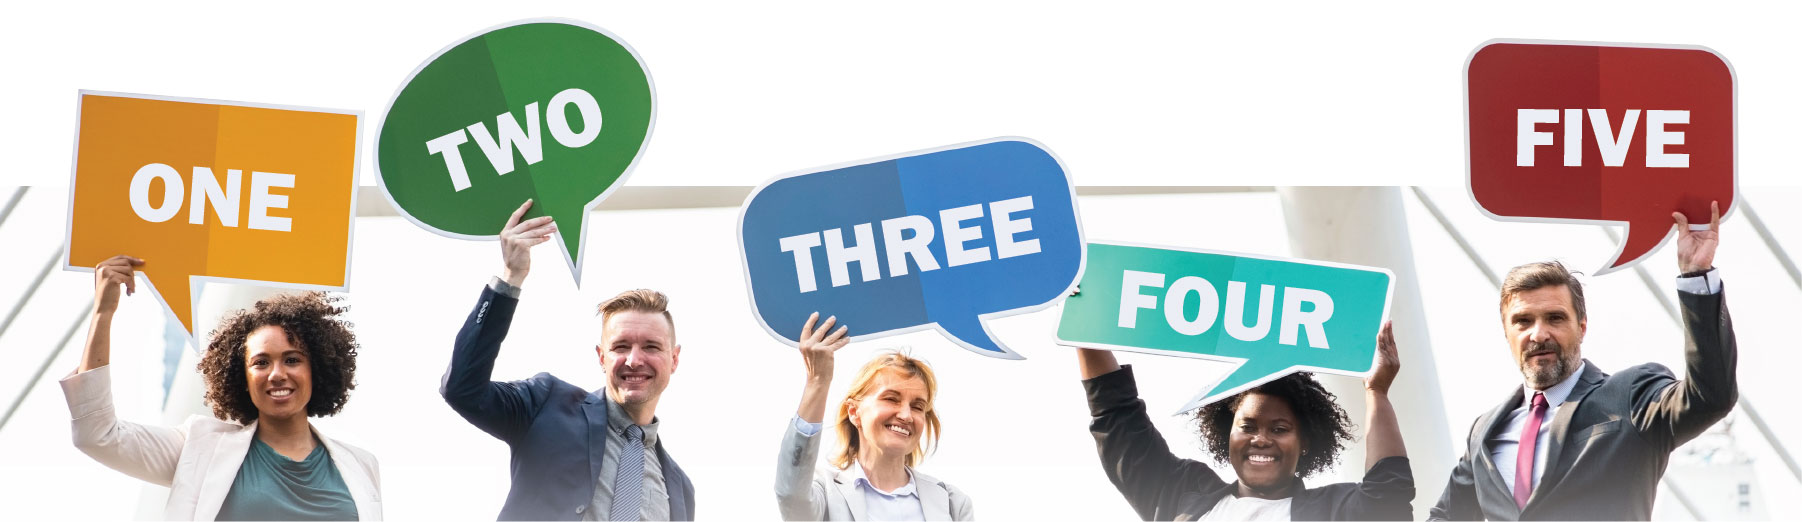 One Two Three Four Five things to consider header